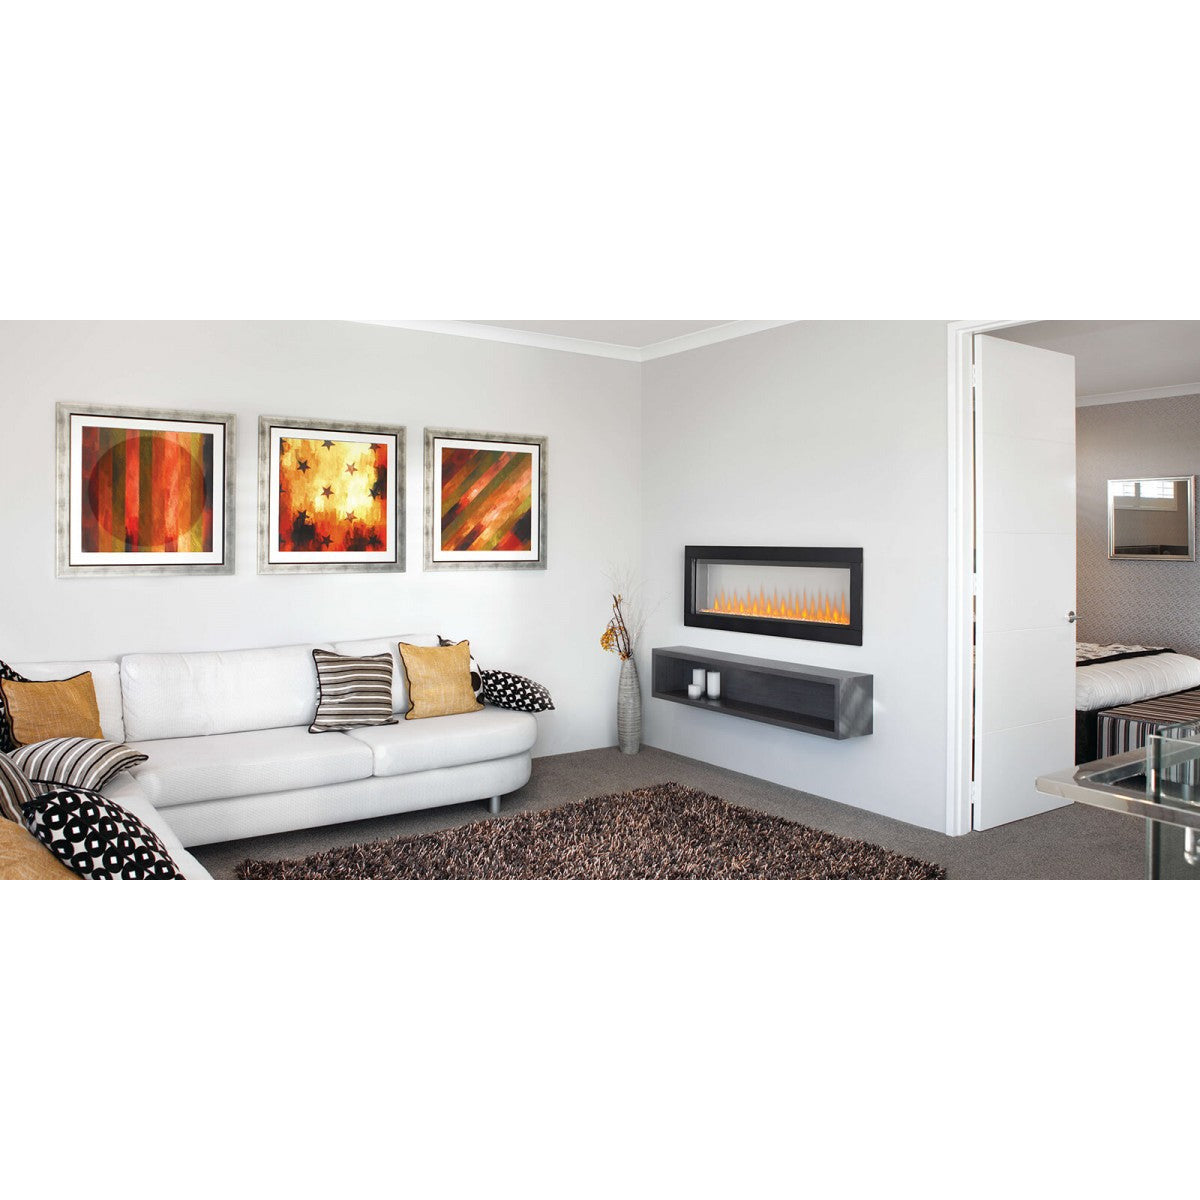 Napoleon CLEARion 60" Elite Built-in Electric Fireplace NEFBD60HE